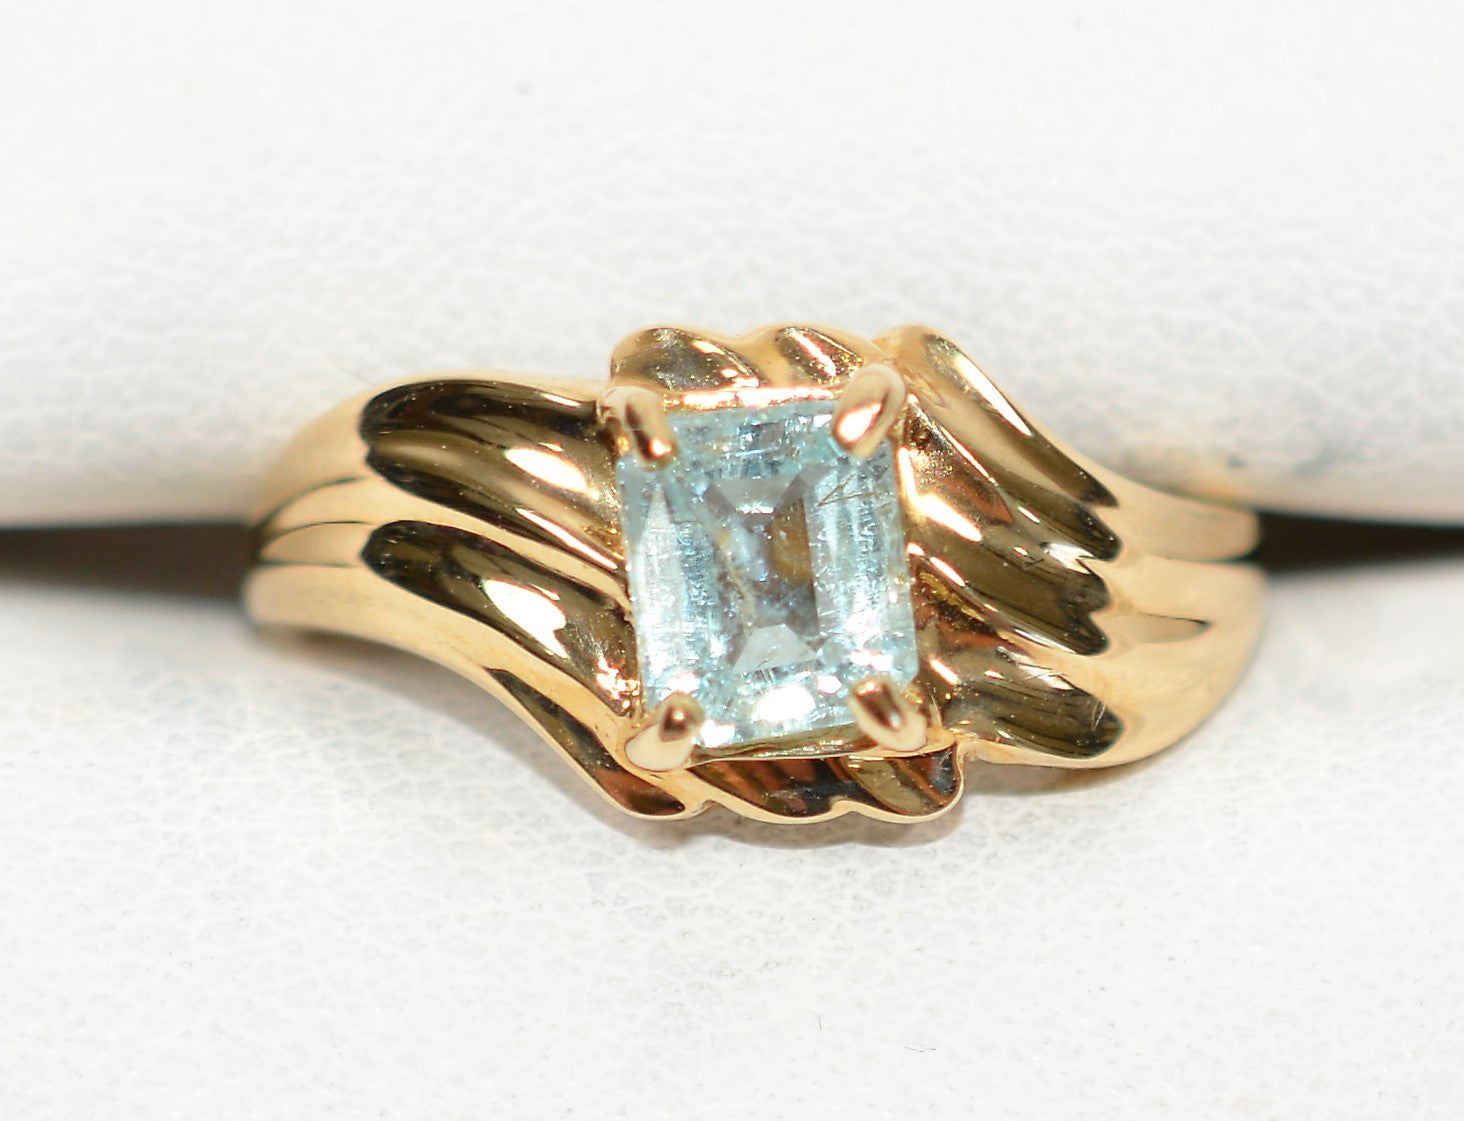 Natural Paraiba Tourmaline Ring 14K Solid Gold .76ct Solitaire Ring Womens Ring Birthstone Ring Estate Ring Ladies Ring Statement Ring Jewelry